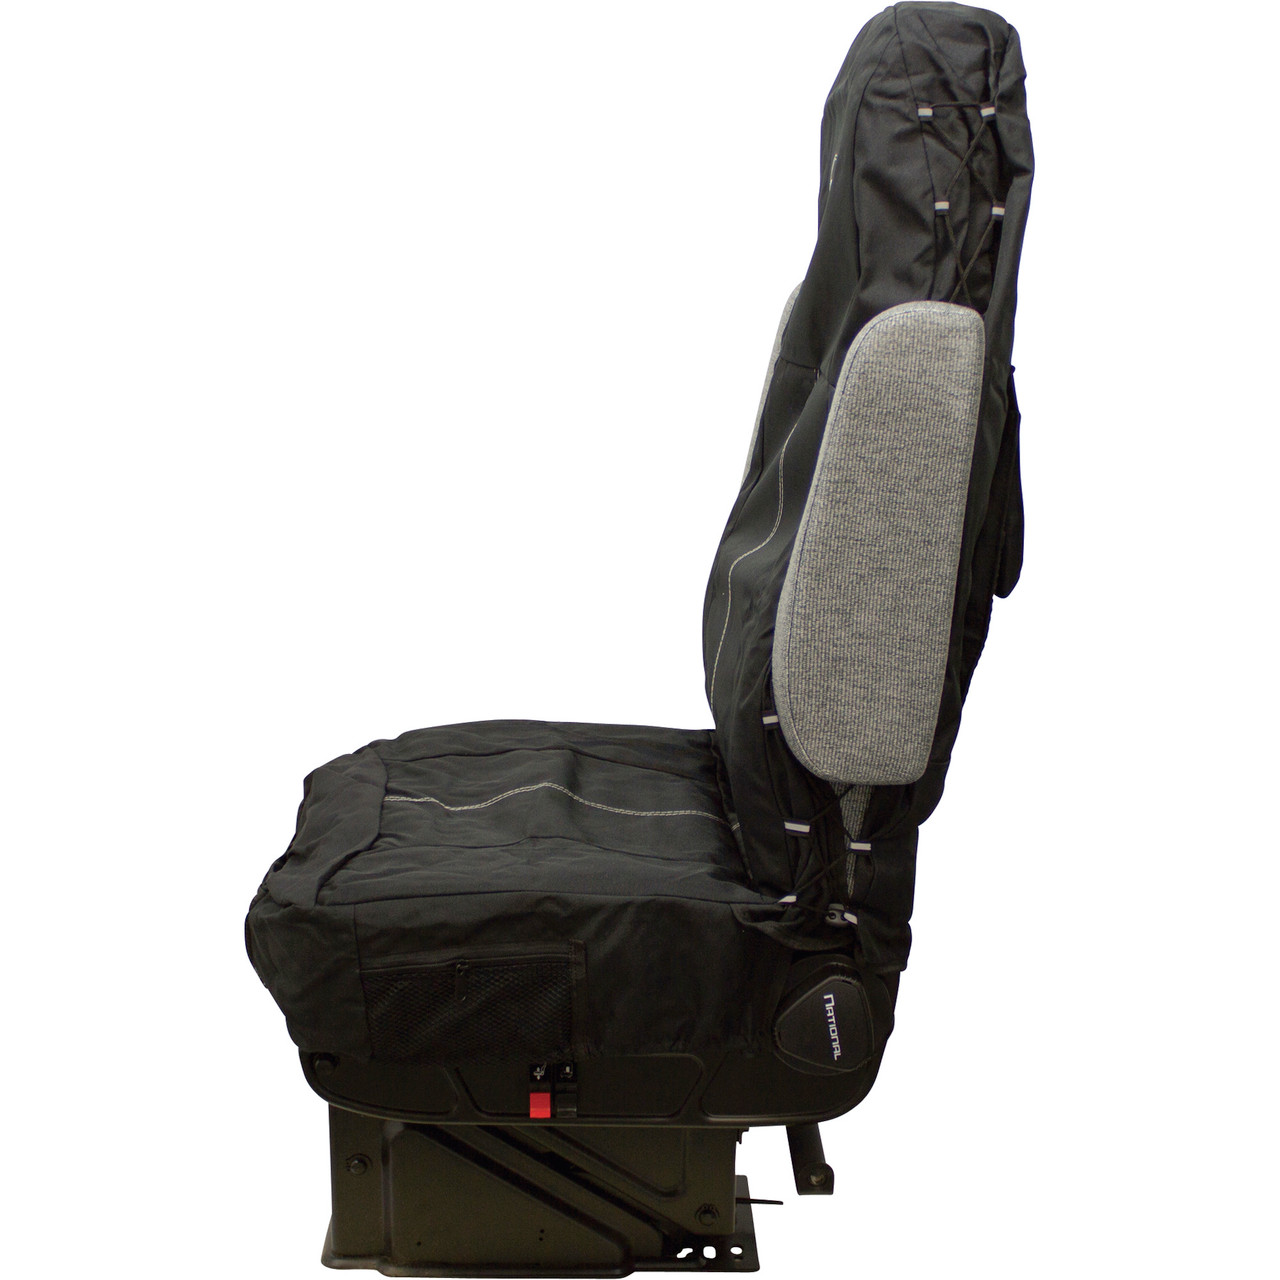 Details about  / Seat Cover Universal pro620 Black s1 for many bikes with instructions show original title